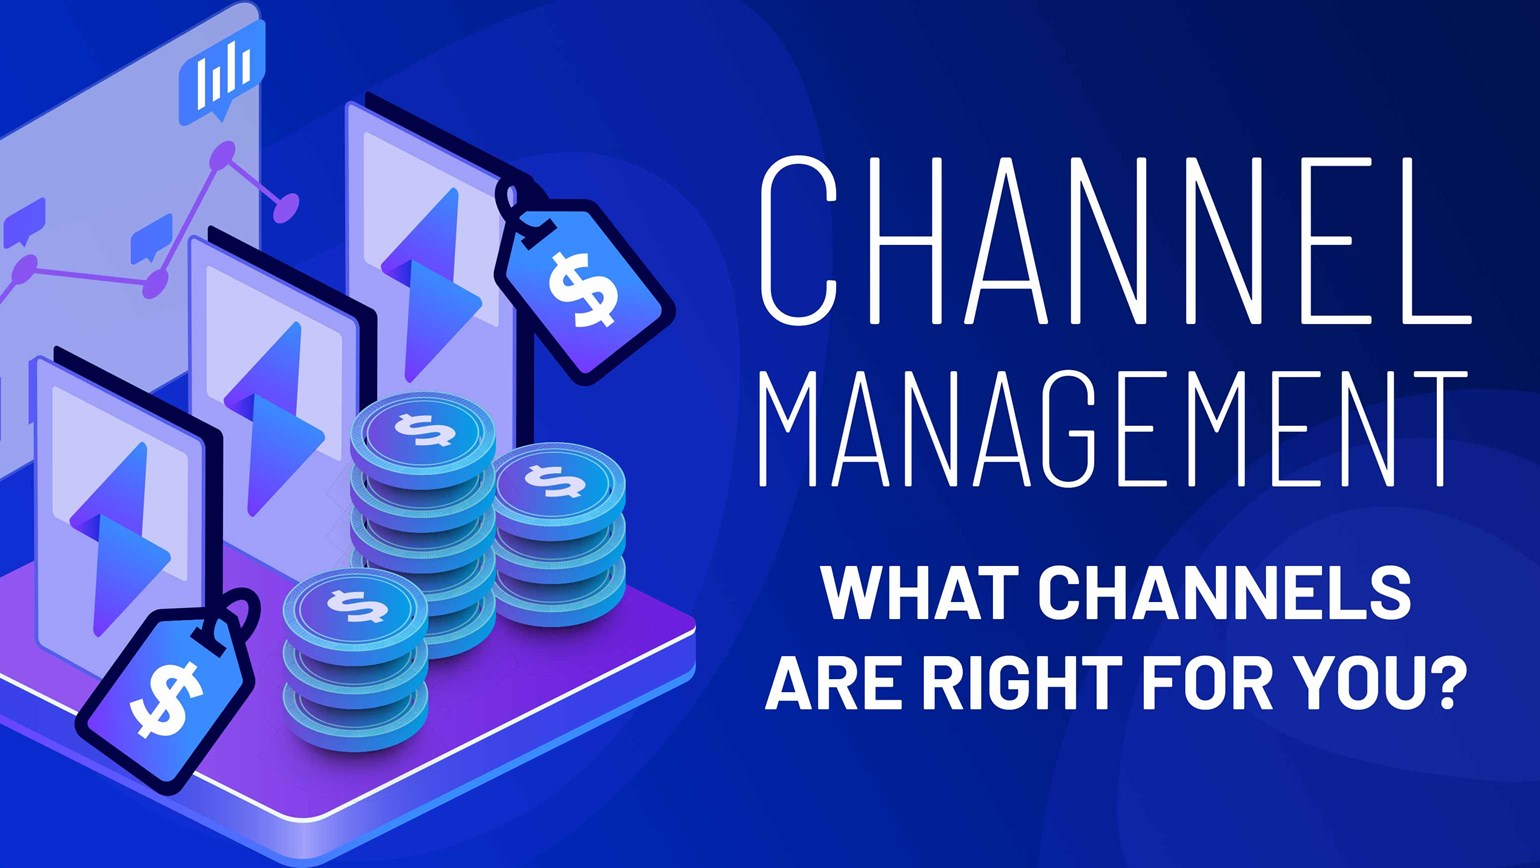 Channel Management: What Channels Are Right For You?